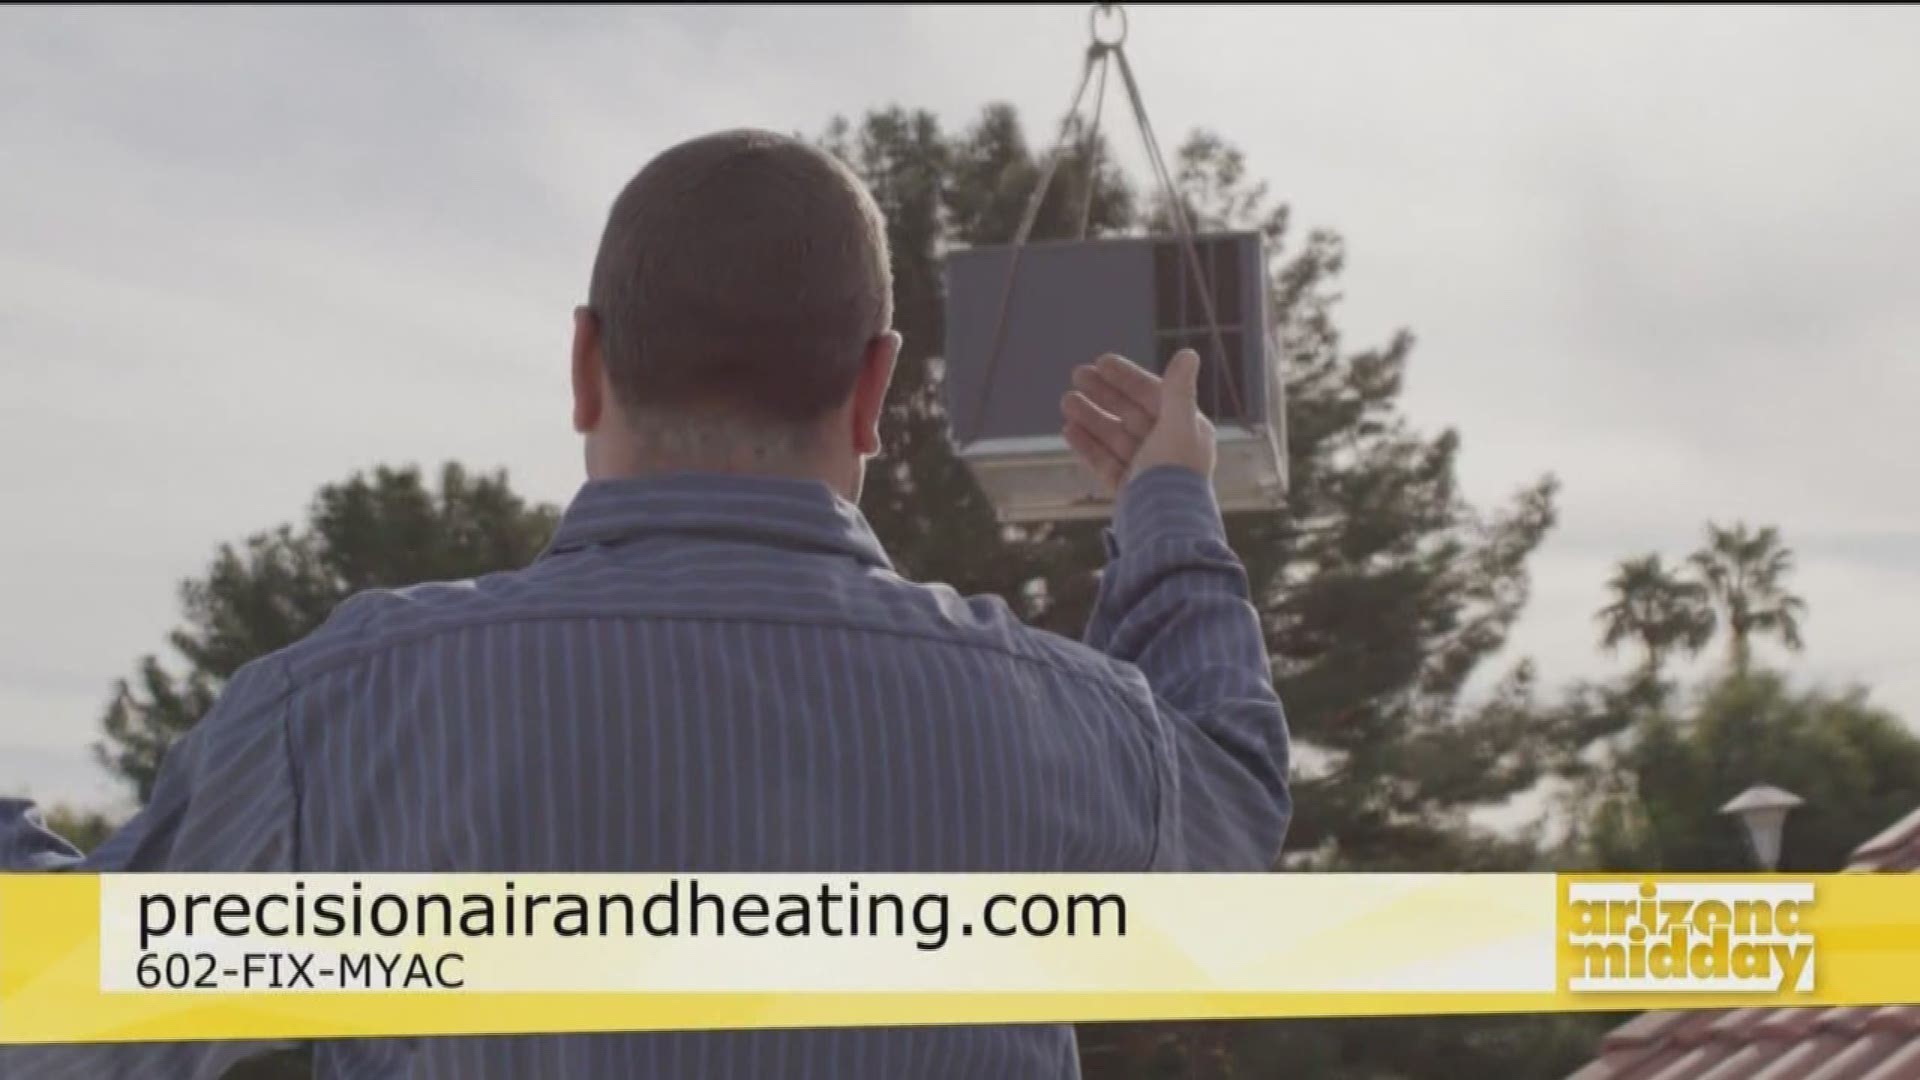 Erik Bryan with Precision Air and Heating tells us the importance of air conditioner upkeep this summer.